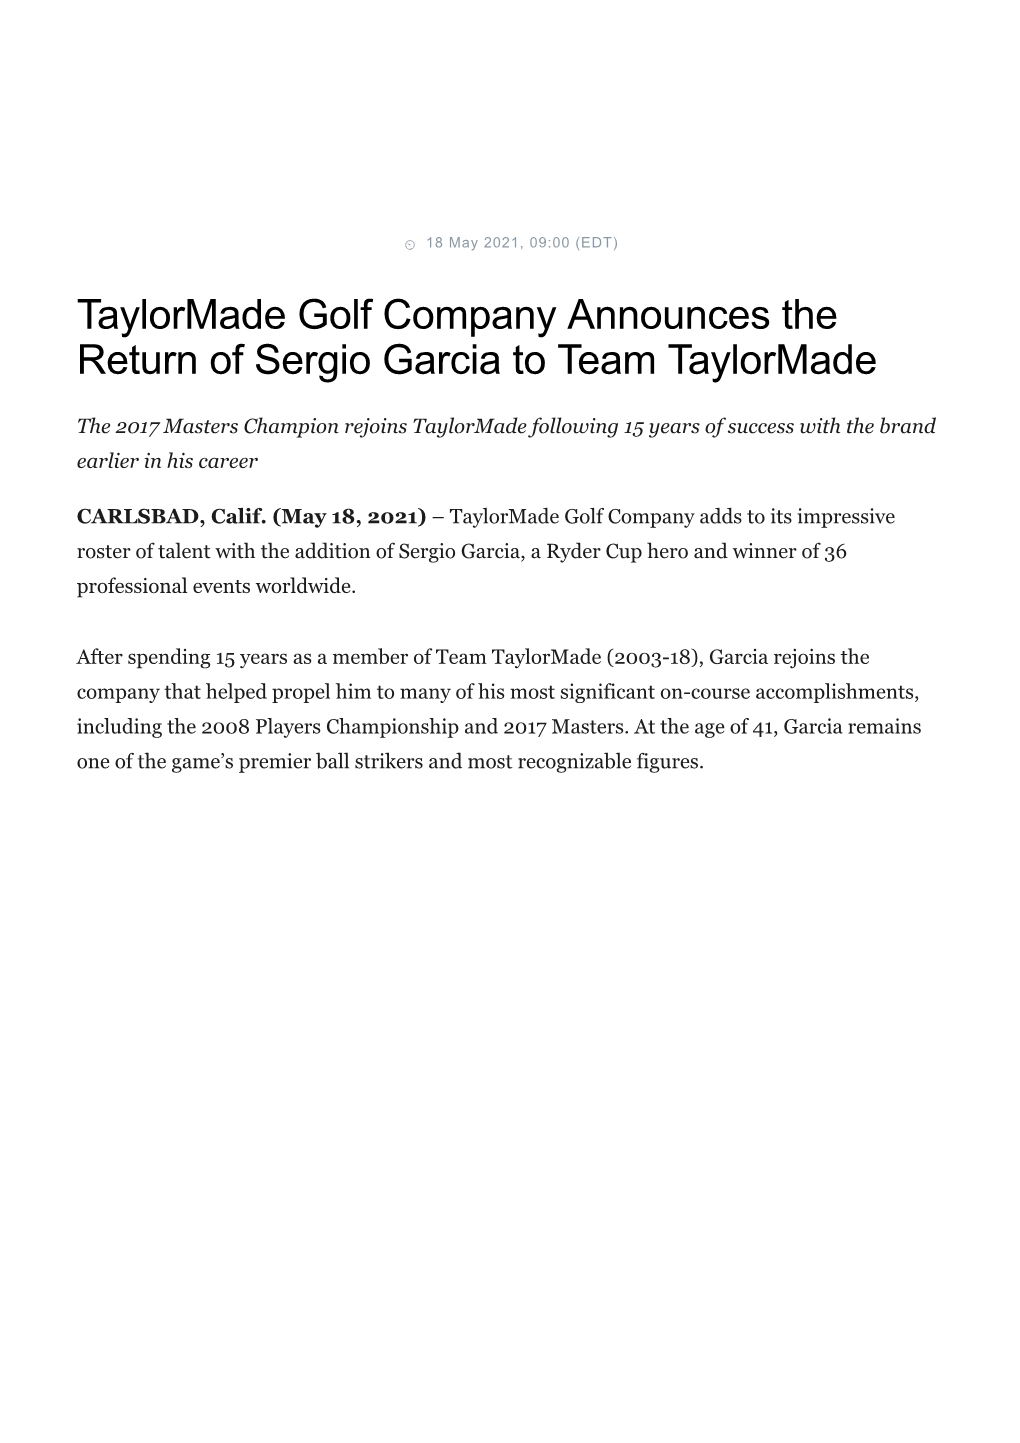 Taylormade Golf Company Announces the Return of Sergio Garcia to Team Taylormade